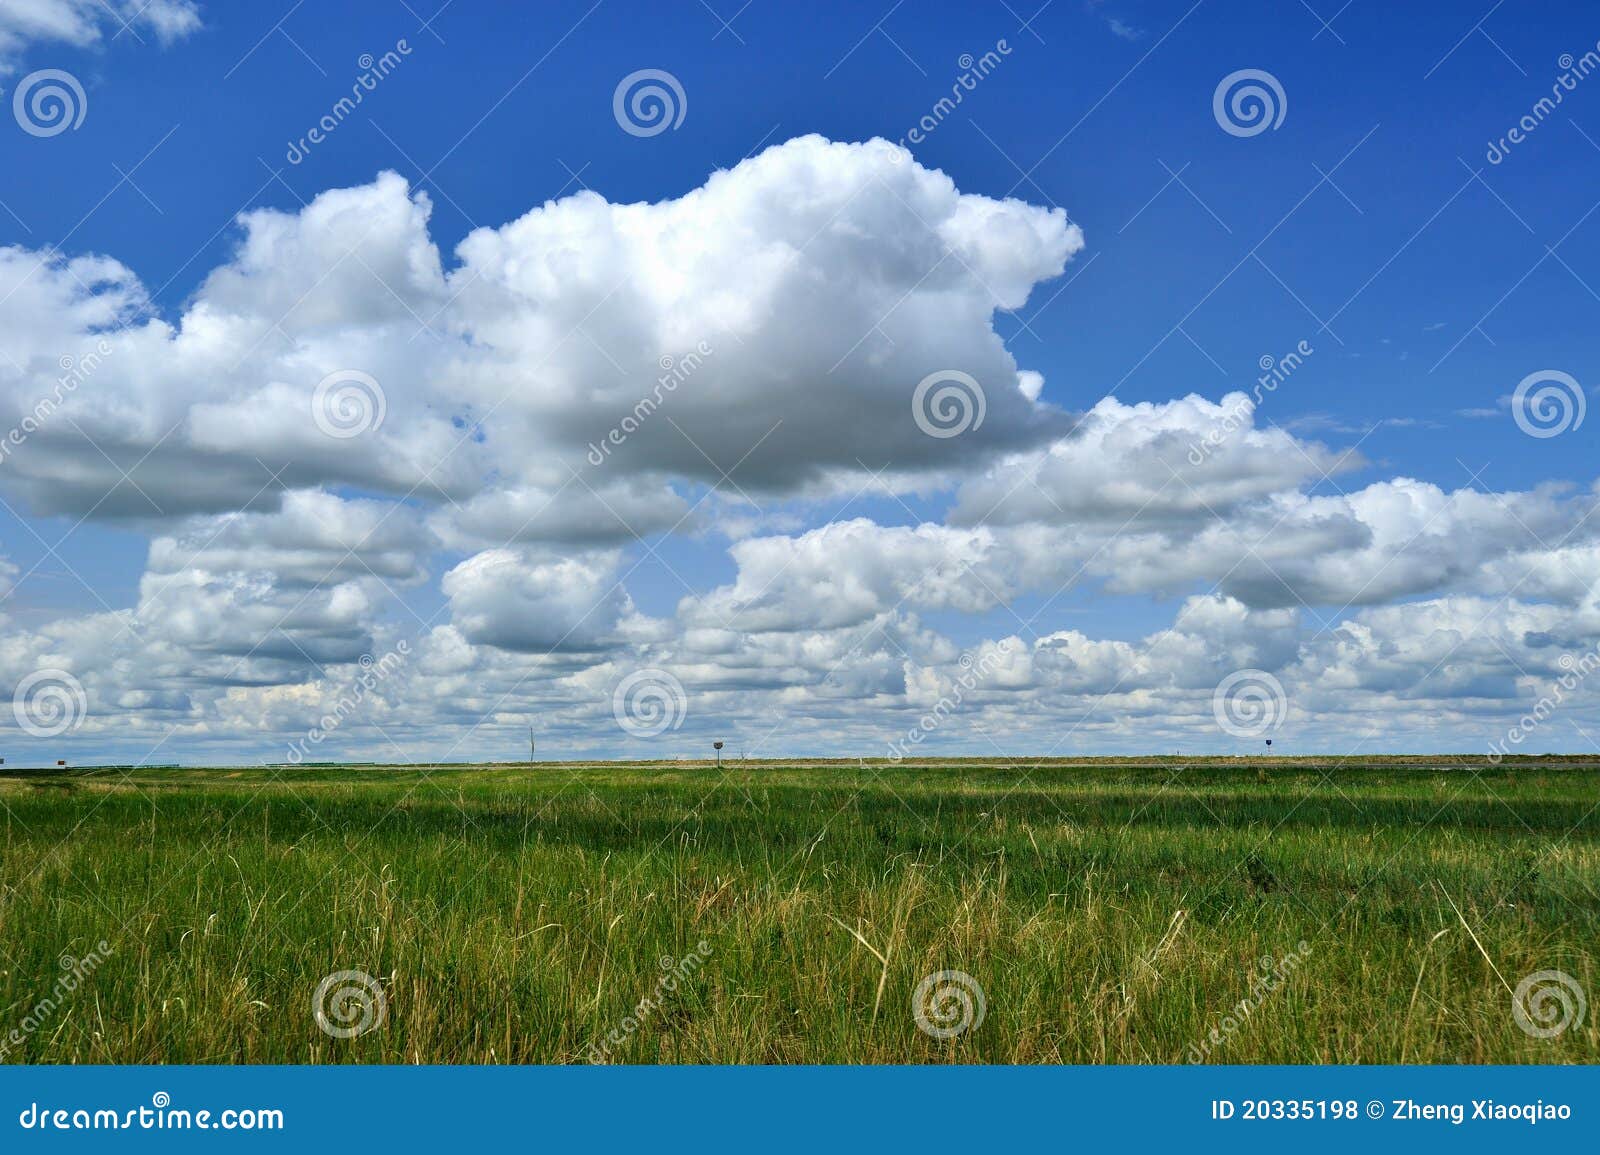 Background of Grass and Clouds Stock Photo - Image of green, scene